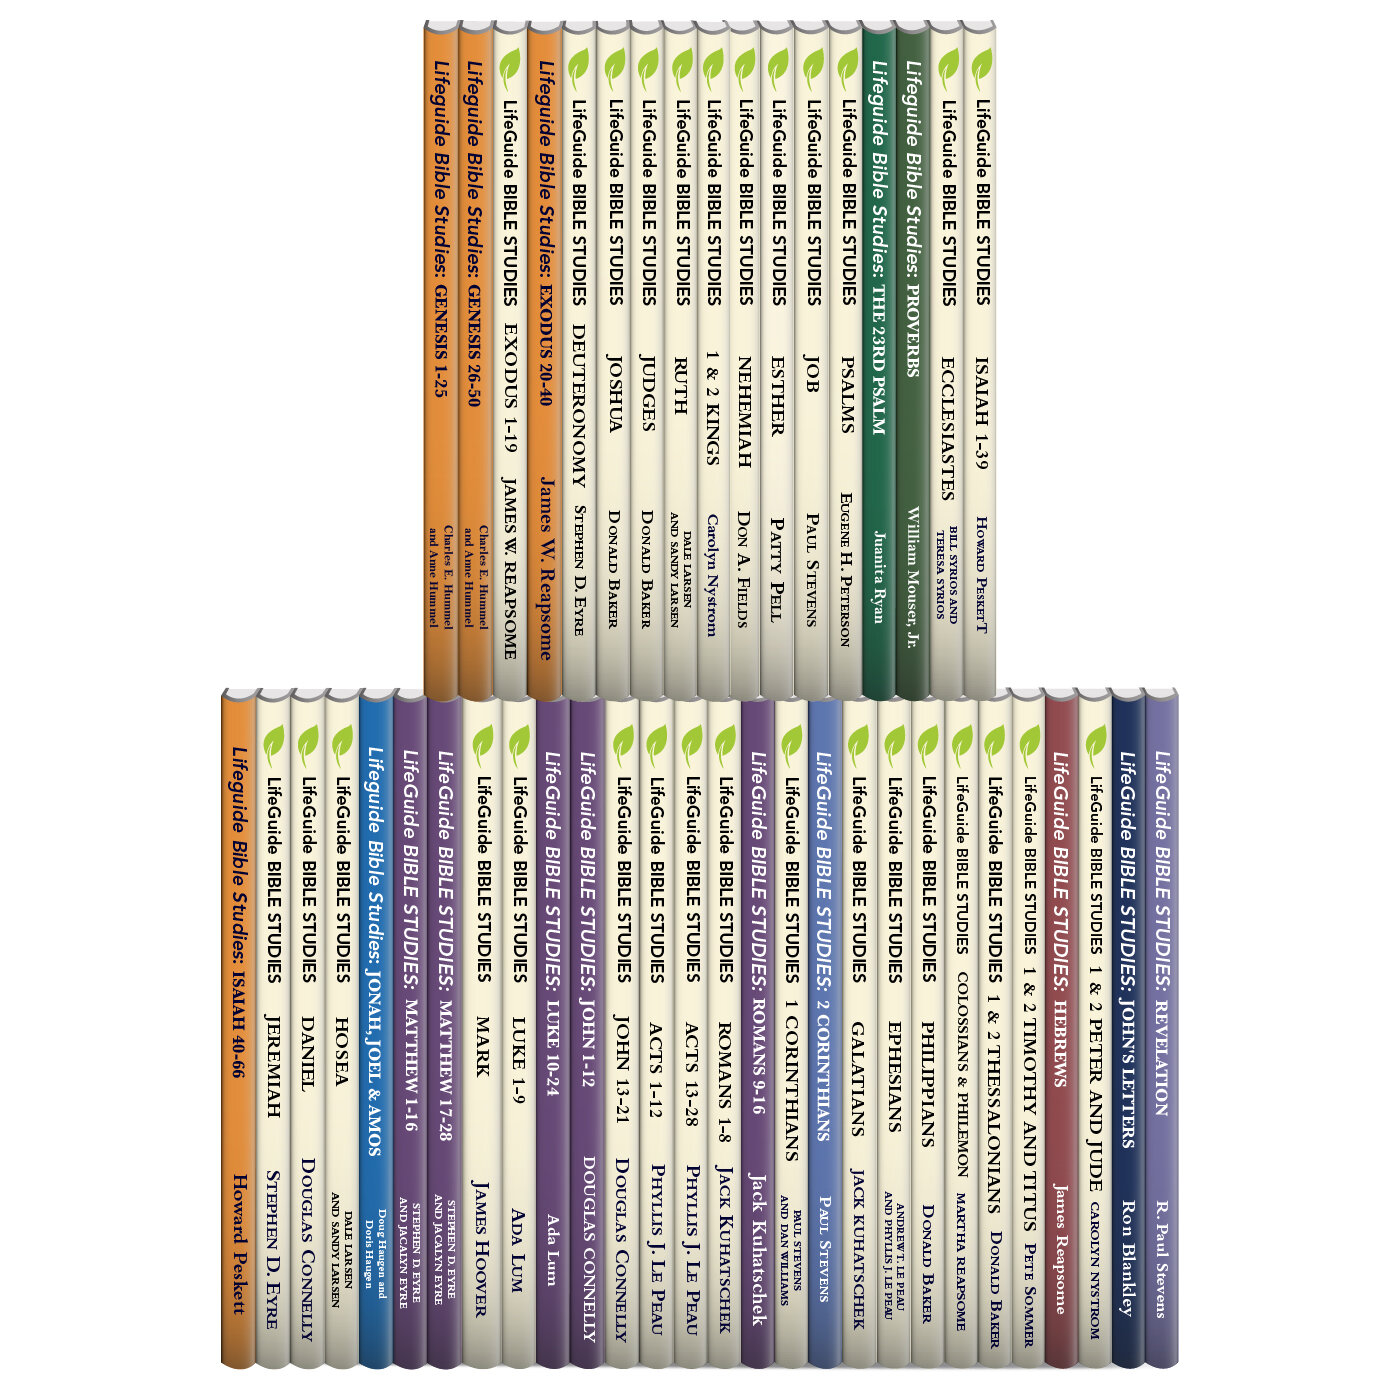 LifeGuide Bible Studies: Old and New Testament Collection (45 vols.)